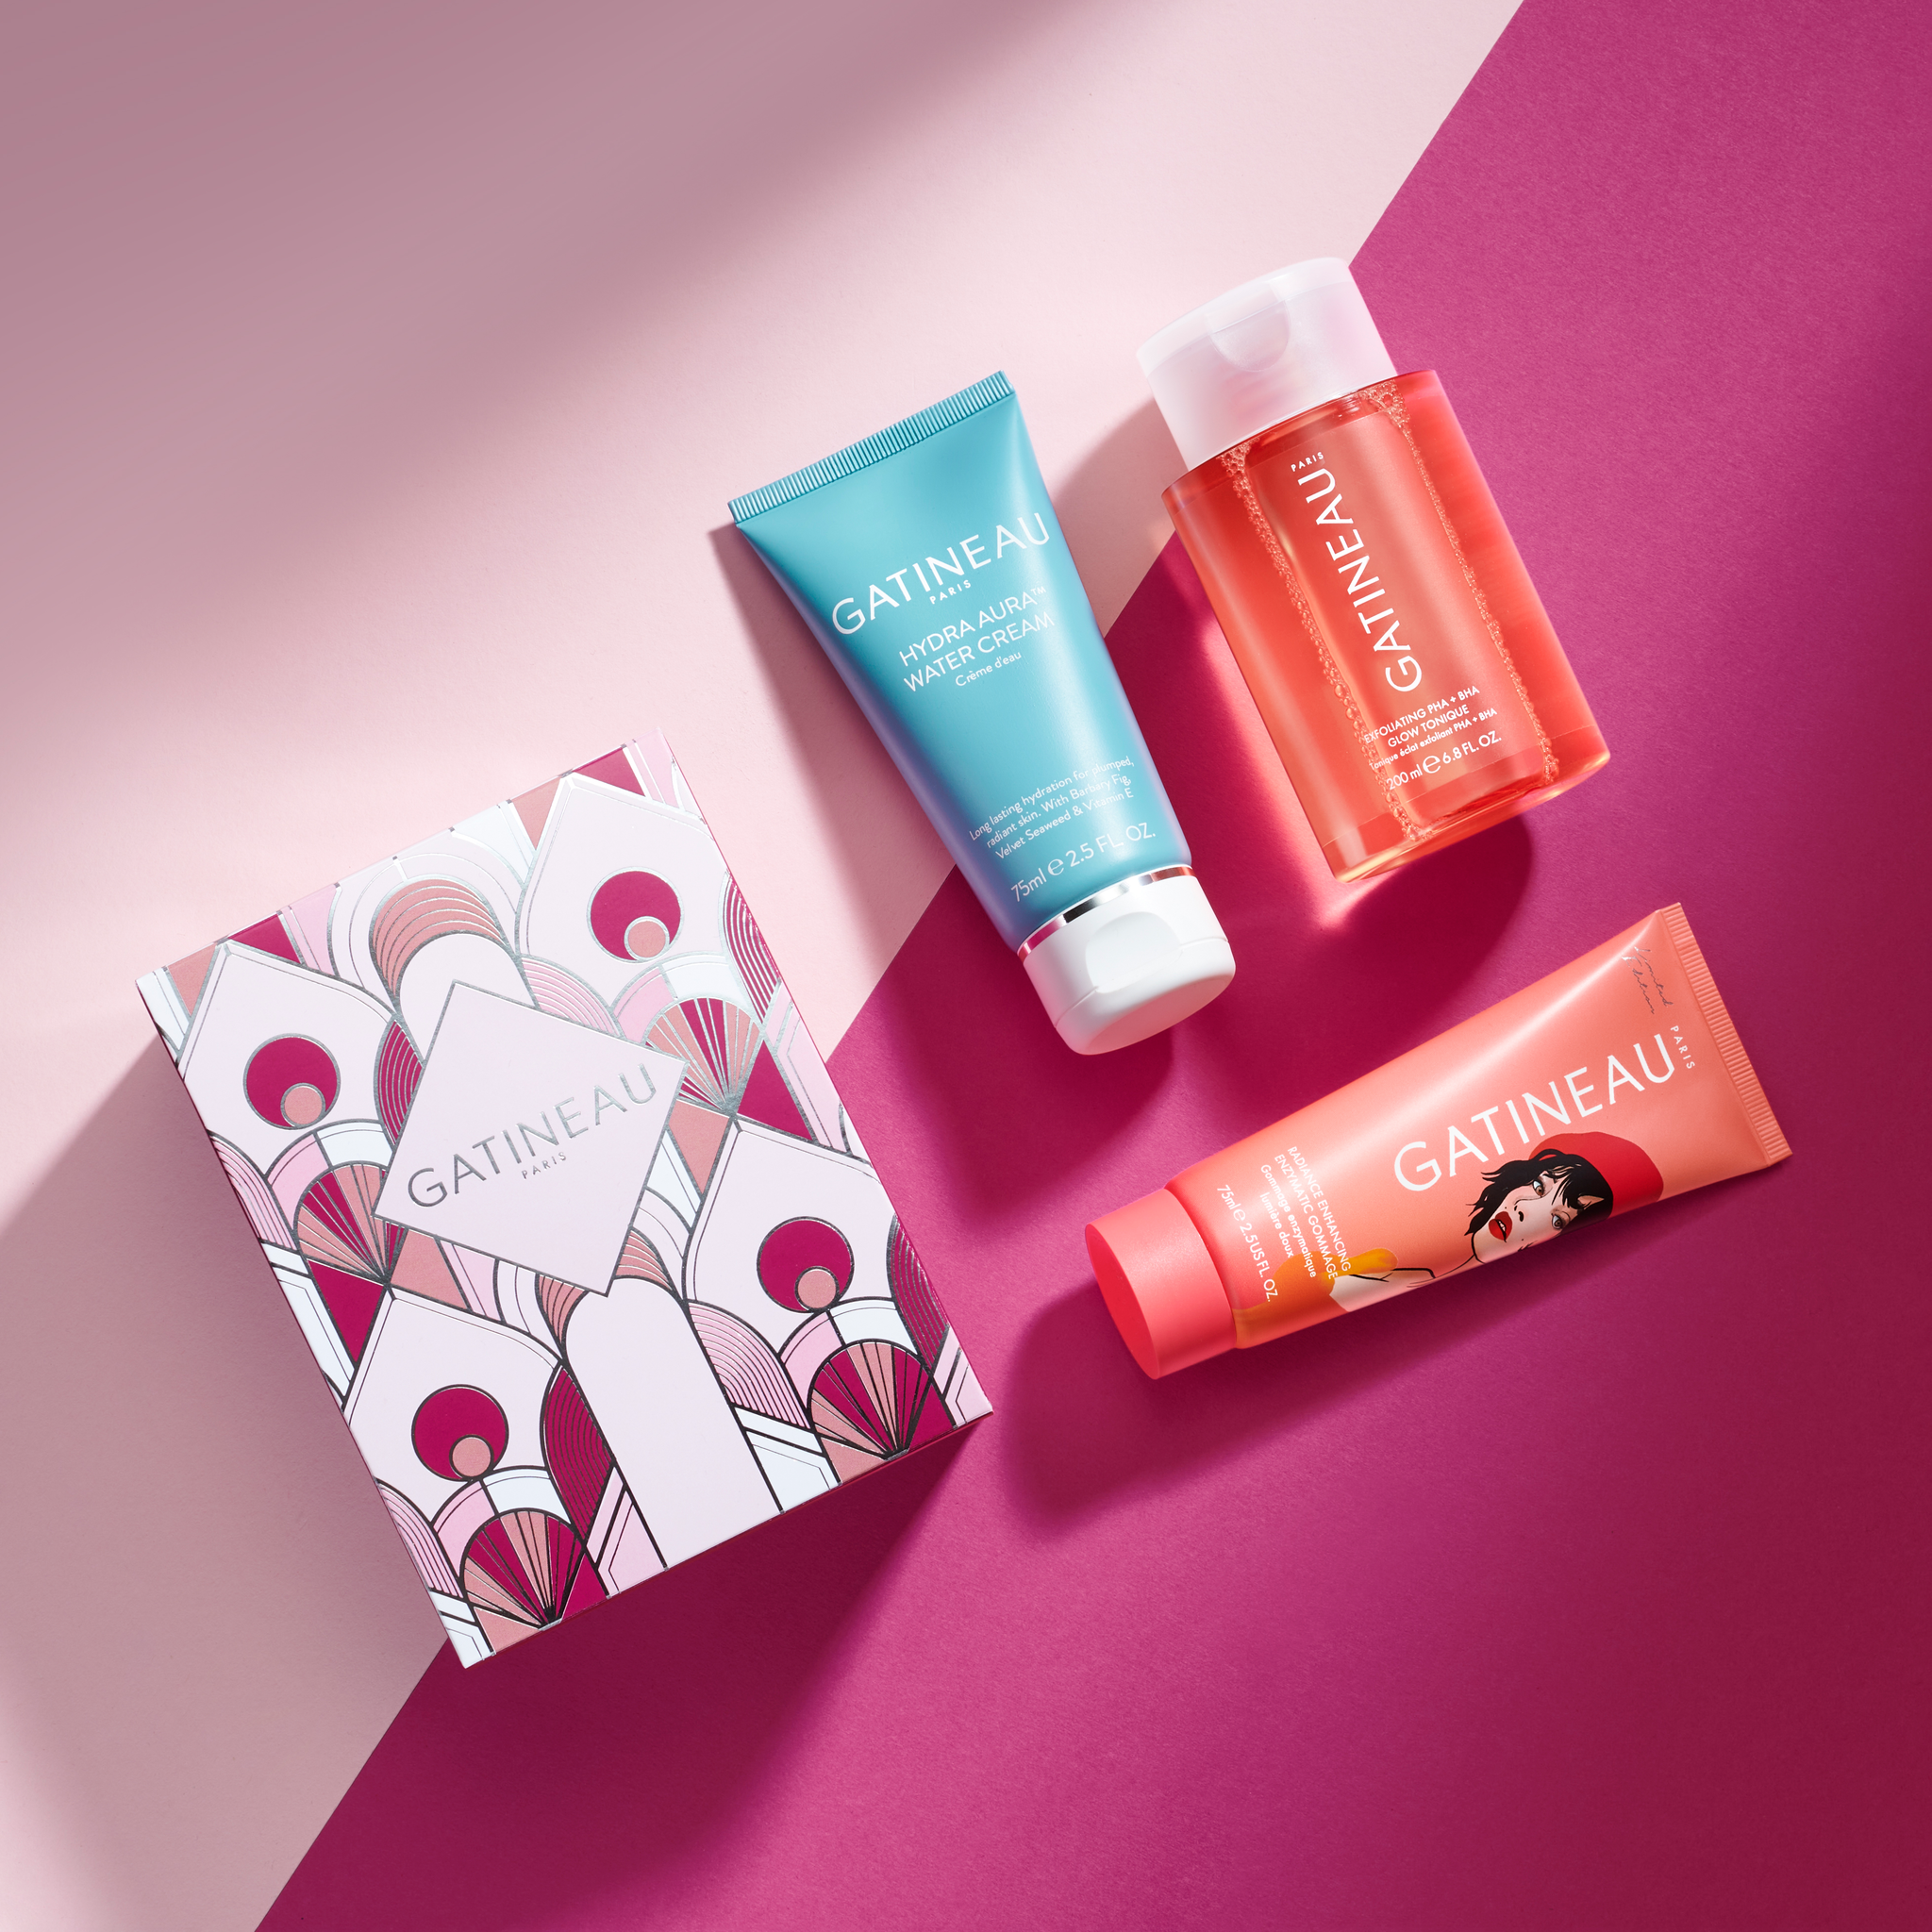 Hydrate & Glow Collection -worth £119